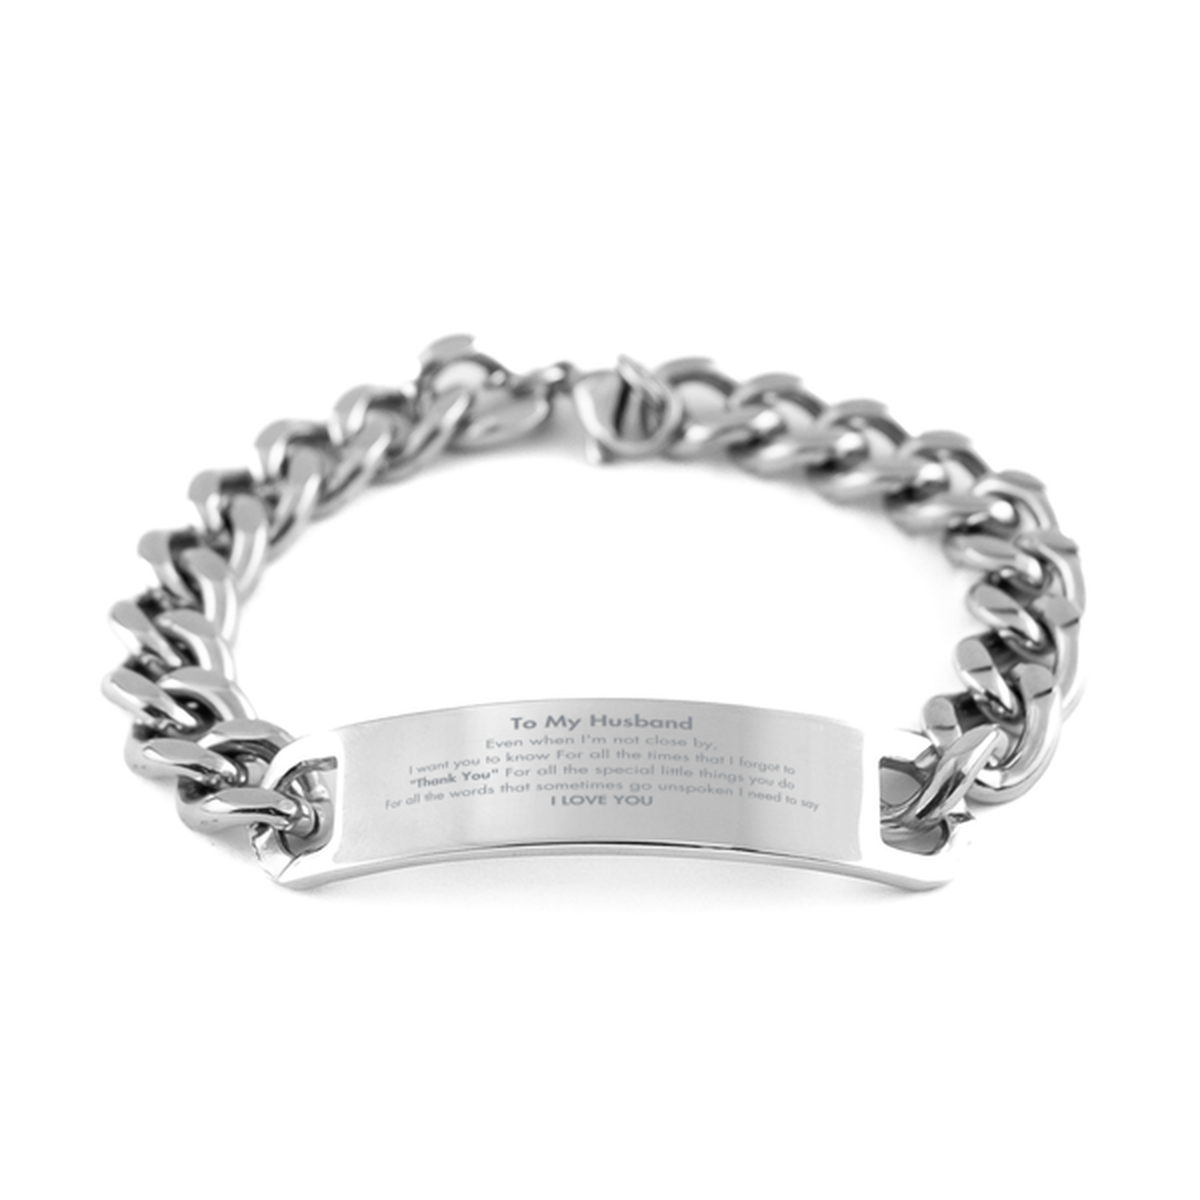 Thank You Gifts for Husband, Keepsake Cuban Chain Stainless Steel Bracelet Gifts for Husband Birthday Mother's day Father's Day Husband For all the words That sometimes go unspoken I need to say I LOVE YOU